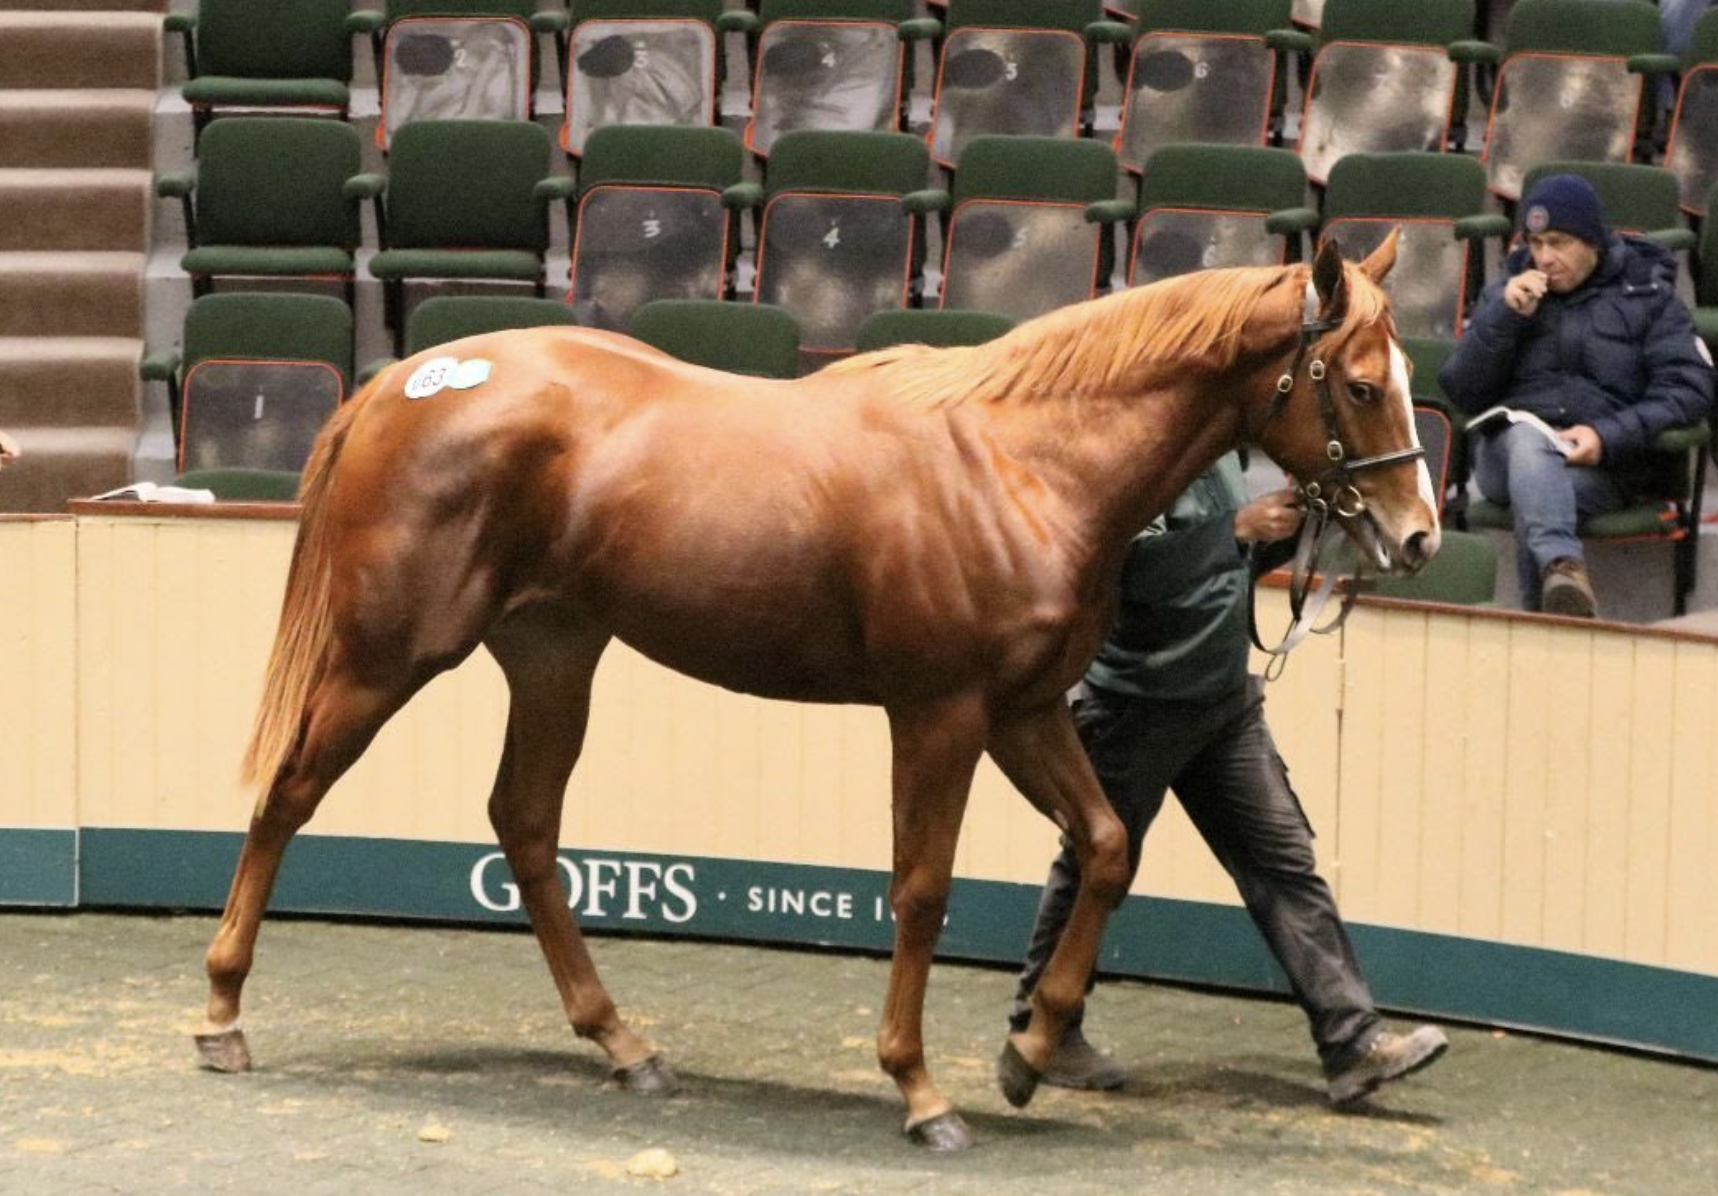 Lot 663 Sioux Nation - Emerald Isle filly. Picture: Goffs.